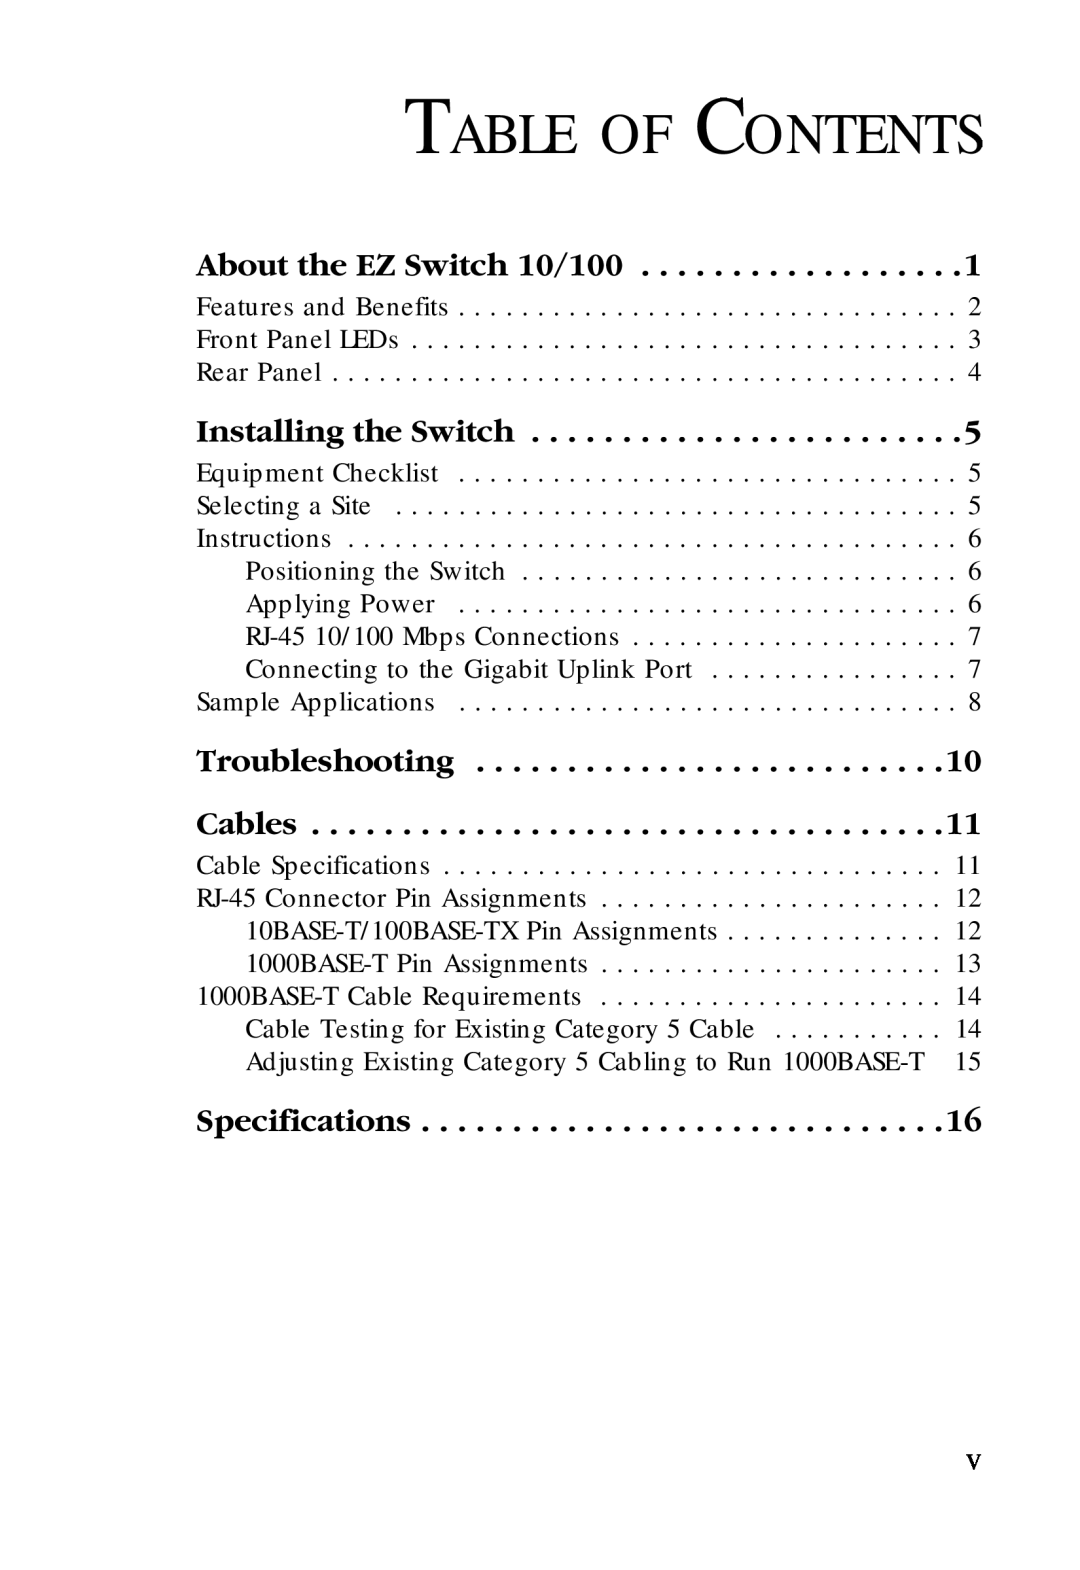 SMC Networks SMC-EZ1024DT manual Table Of Contents, About the EZ Switch 10/100, Installing the Switch, Specifications 